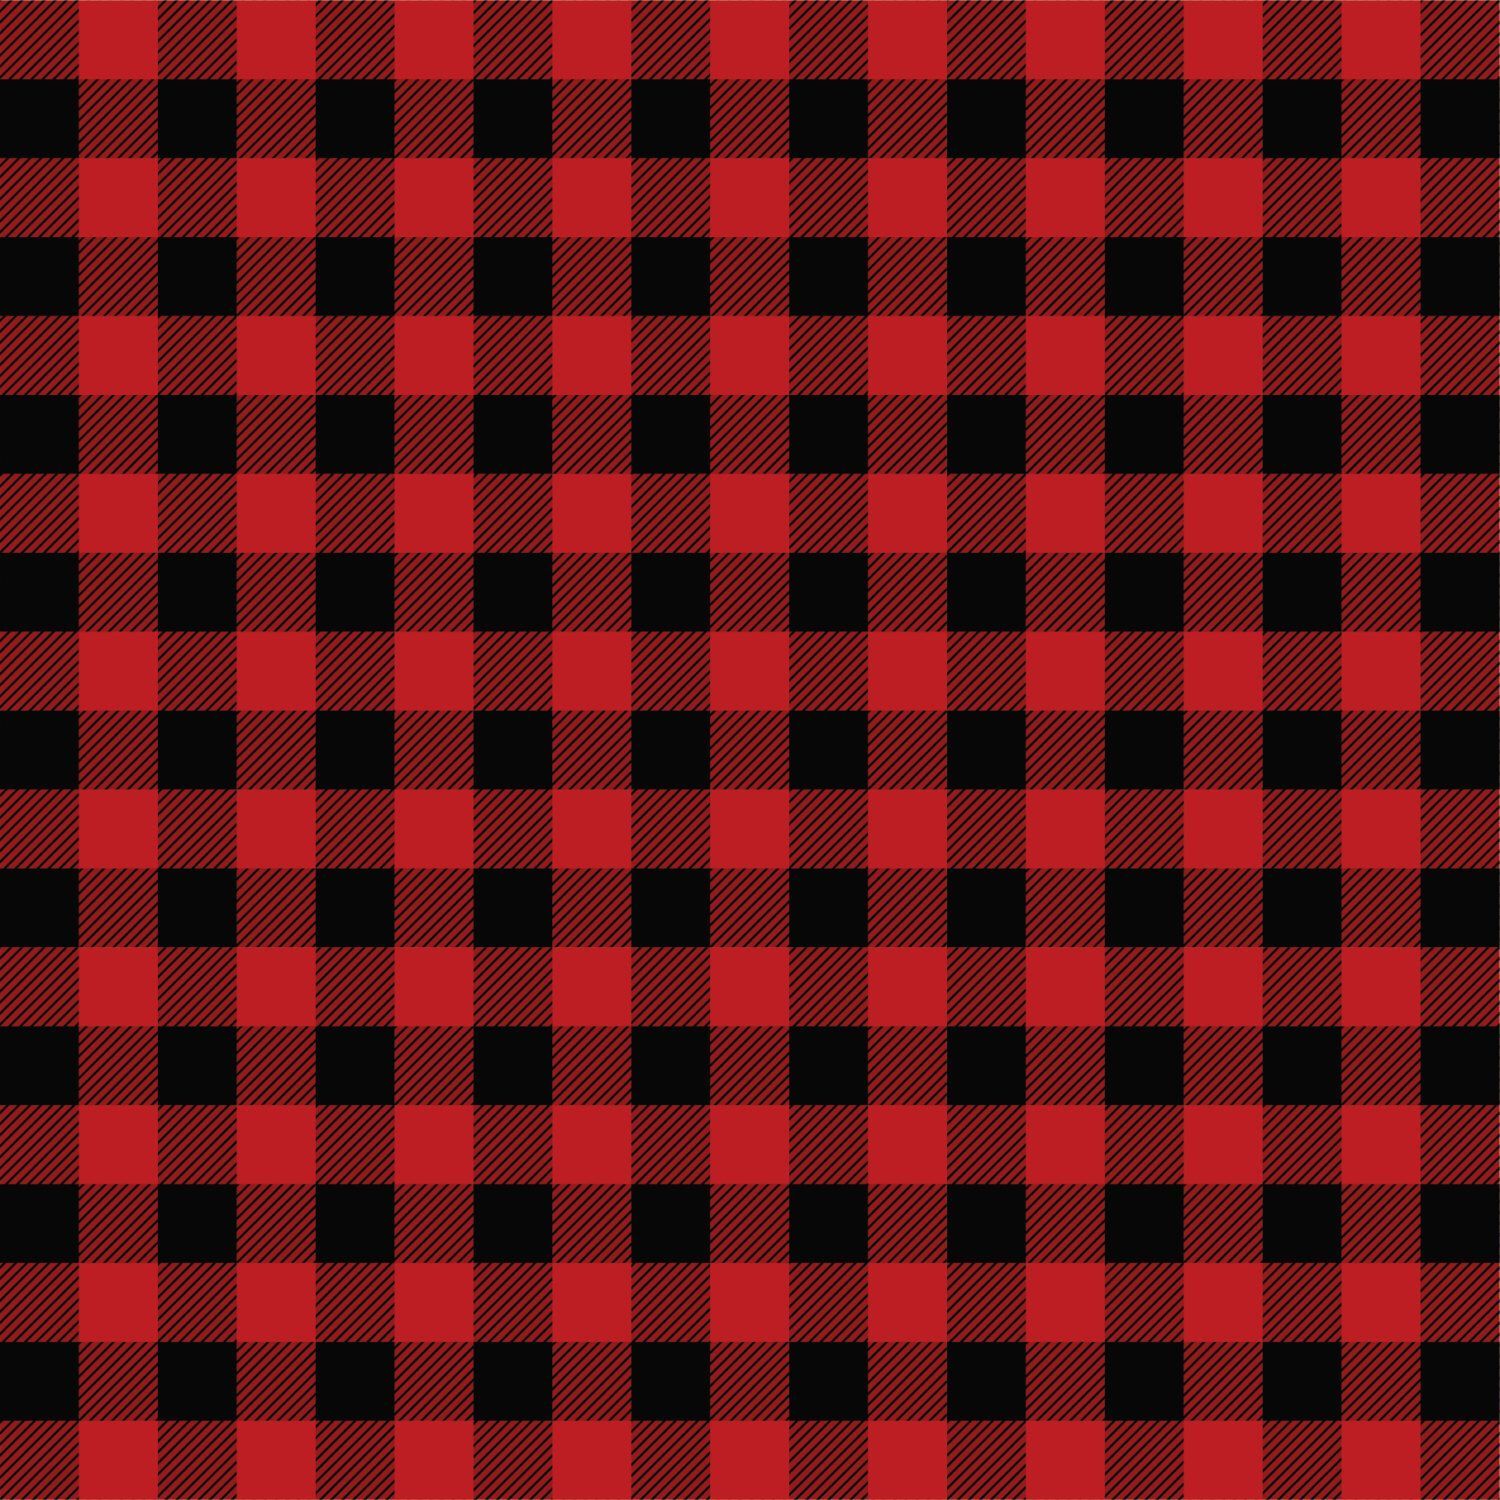 Black and Red Plaid Wallpaper Free Black and Red Plaid Background